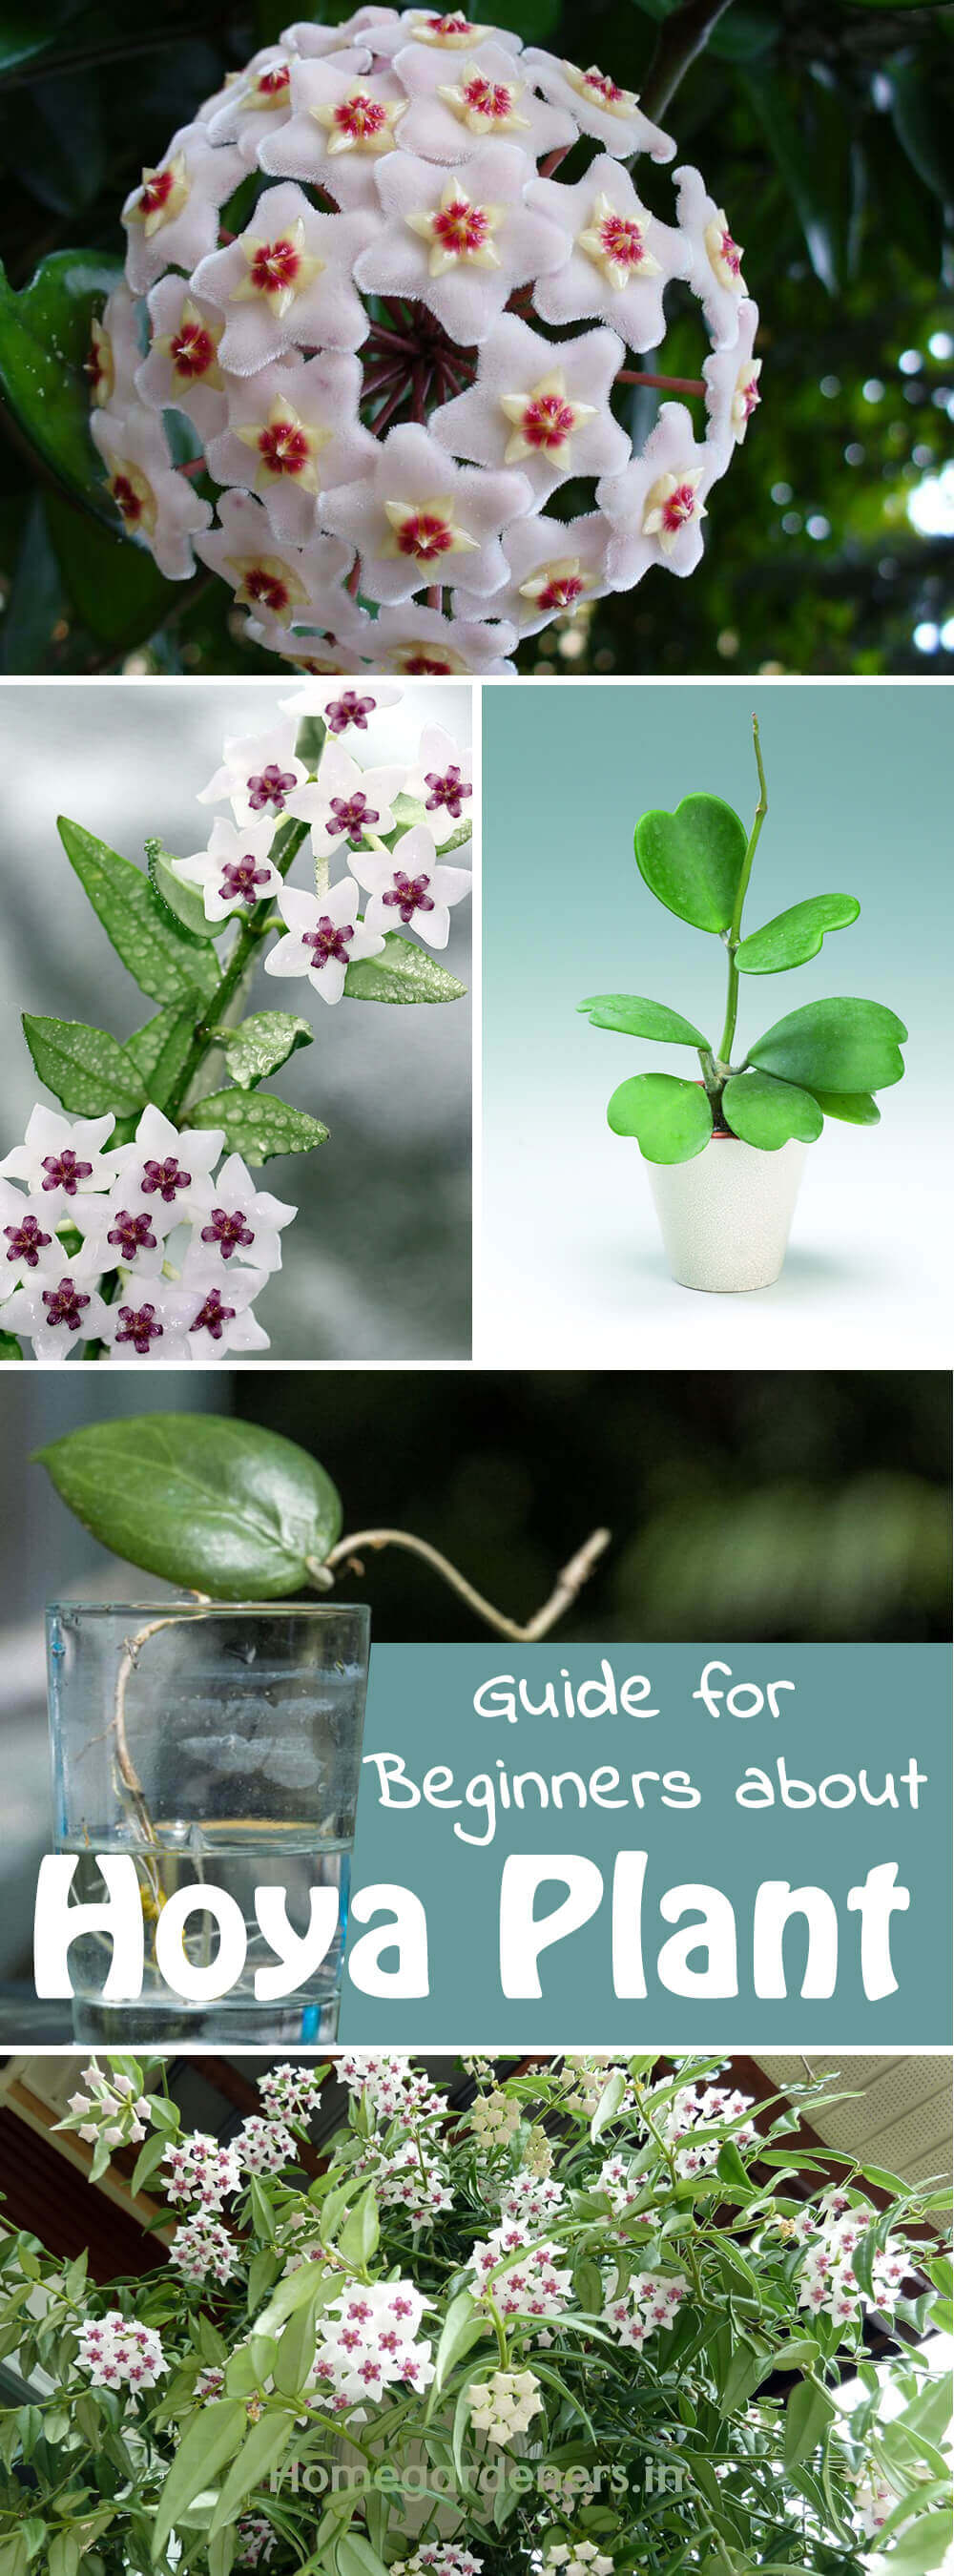 The Complete Guide for Beginners about Hoya plant -   18 planting Interior flower ideas